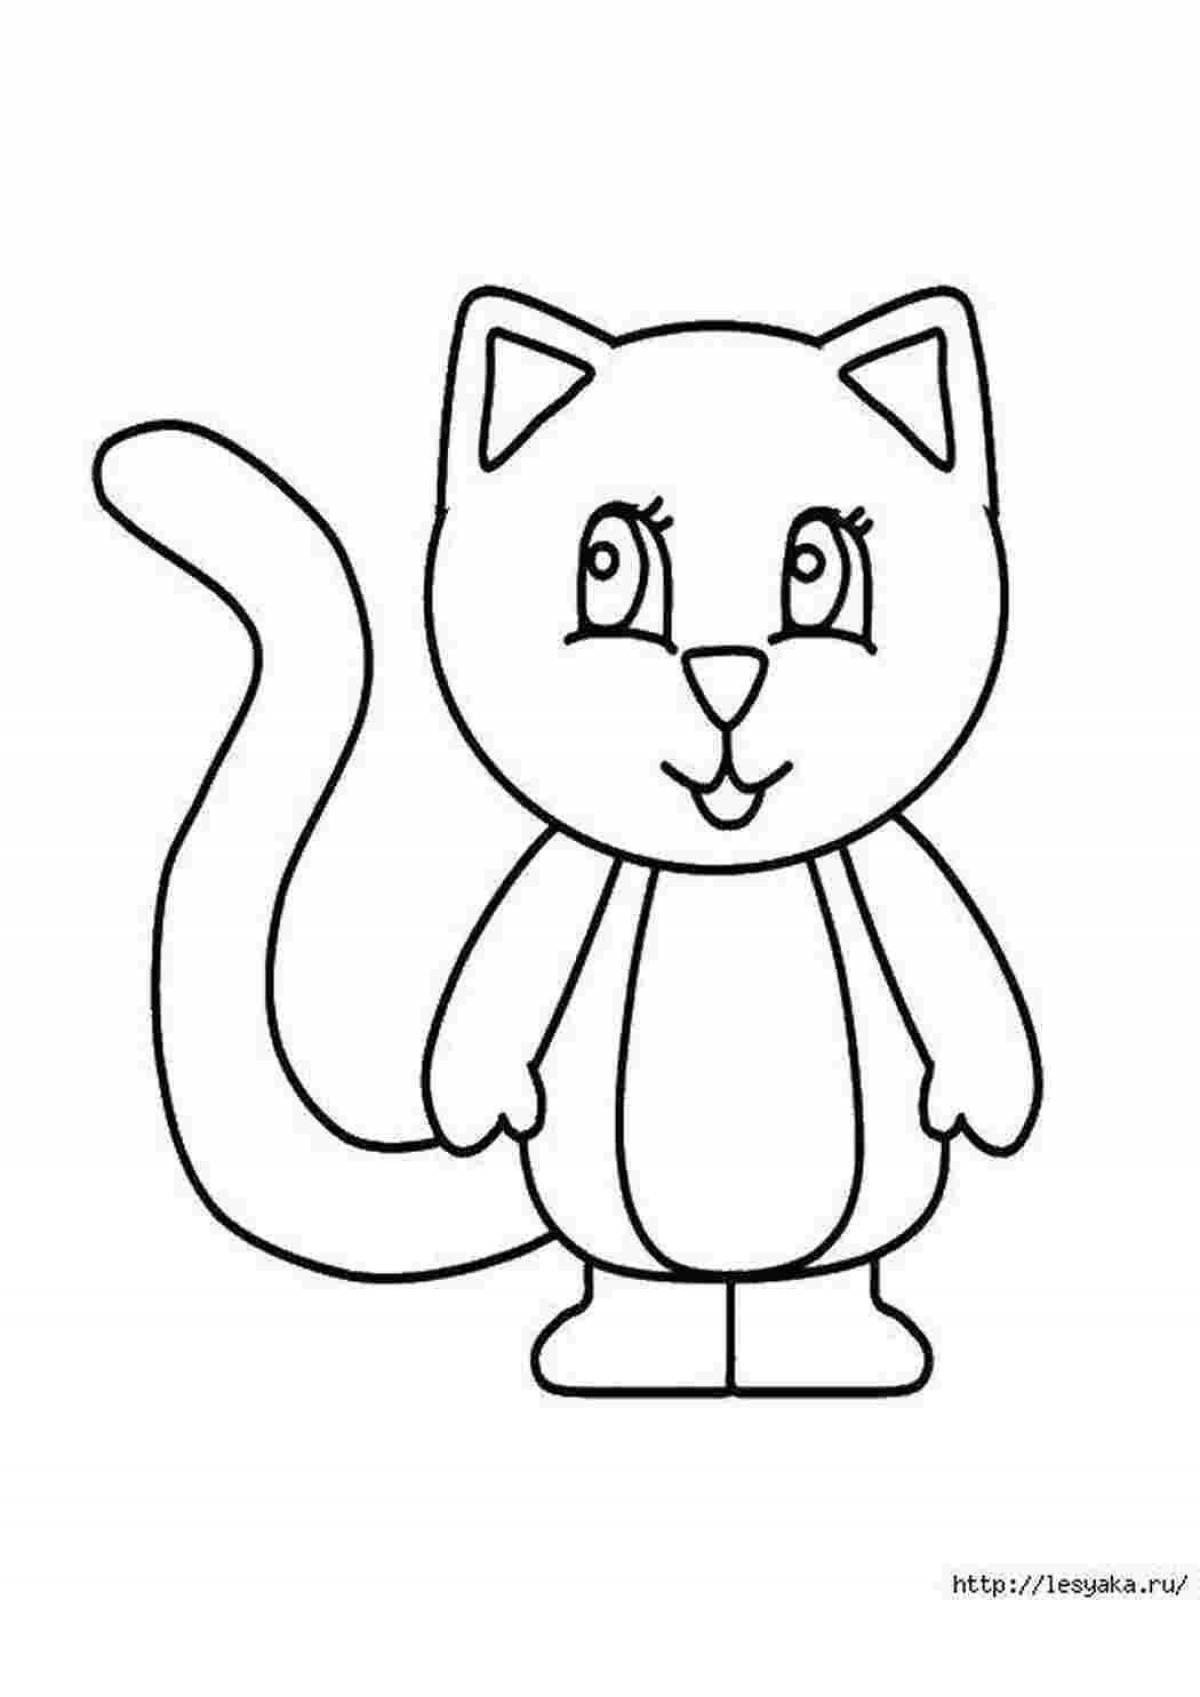 Animated cat toys coloring page